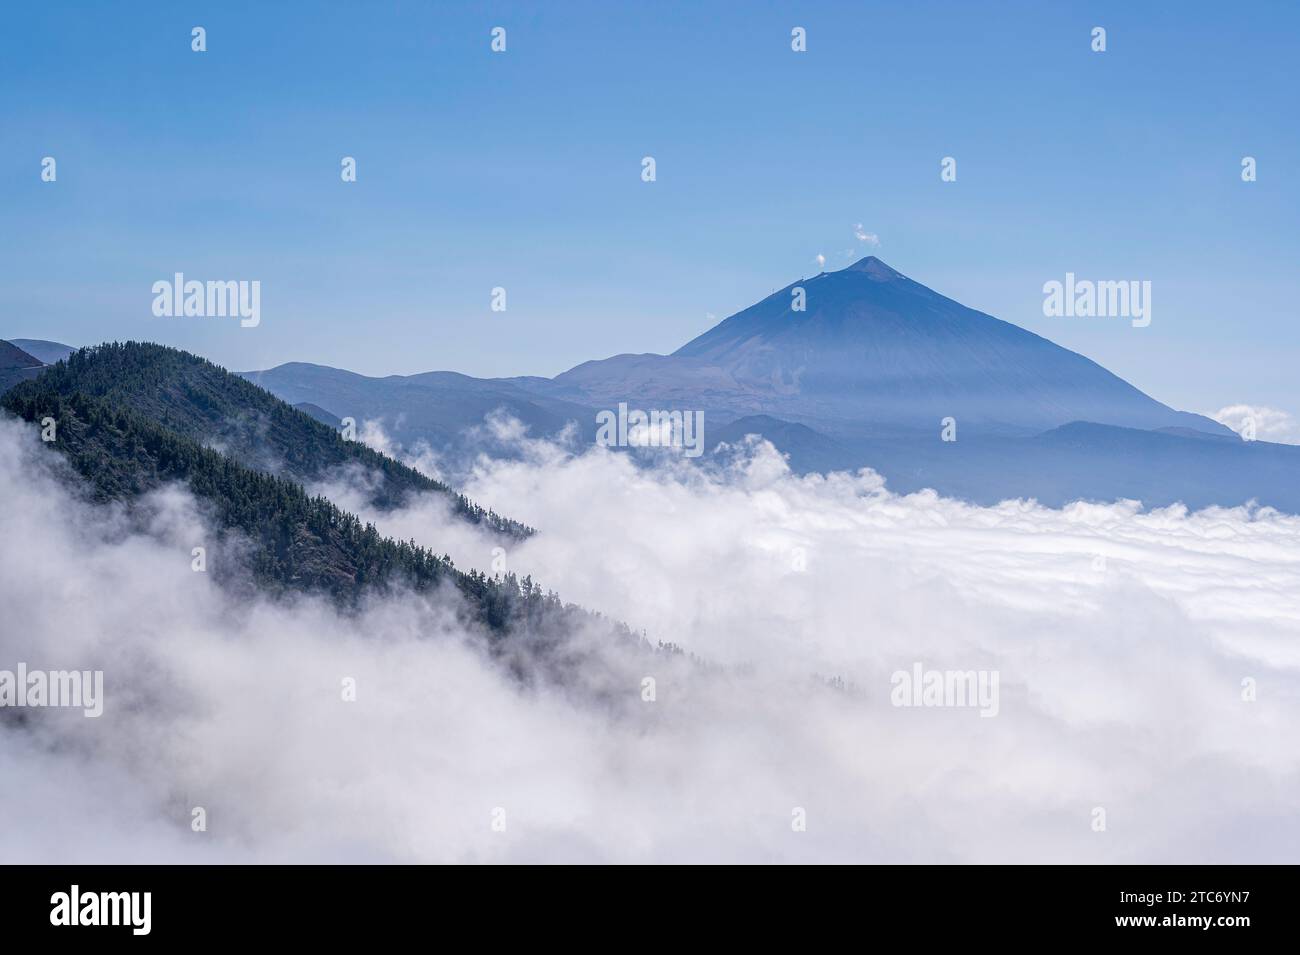 Cloud inversion on the slopes of Mount Teide, Tenerife, Spain, which are covered in pine trees Stock Photo